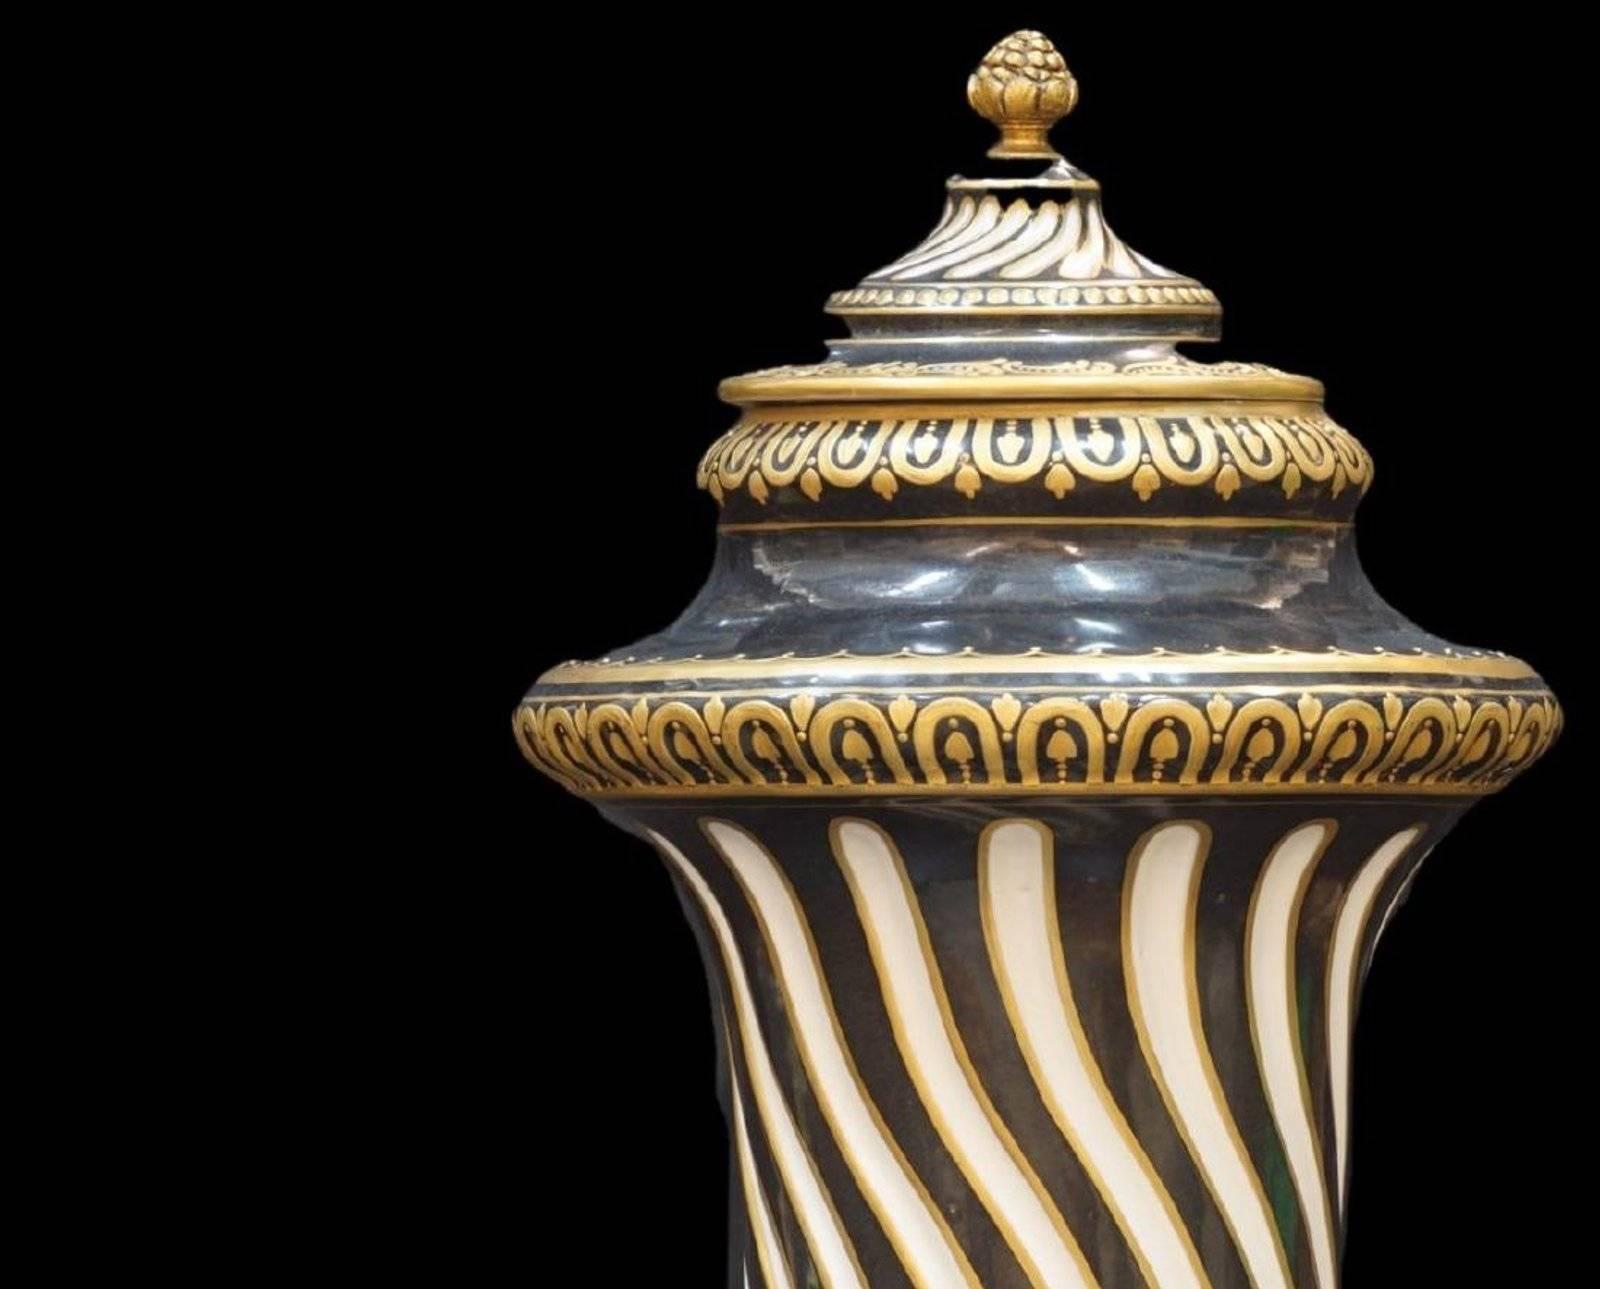 Lidded French jar, made of hard paste porcelain and hand-painted gold, black and white. Signed on the bottom 